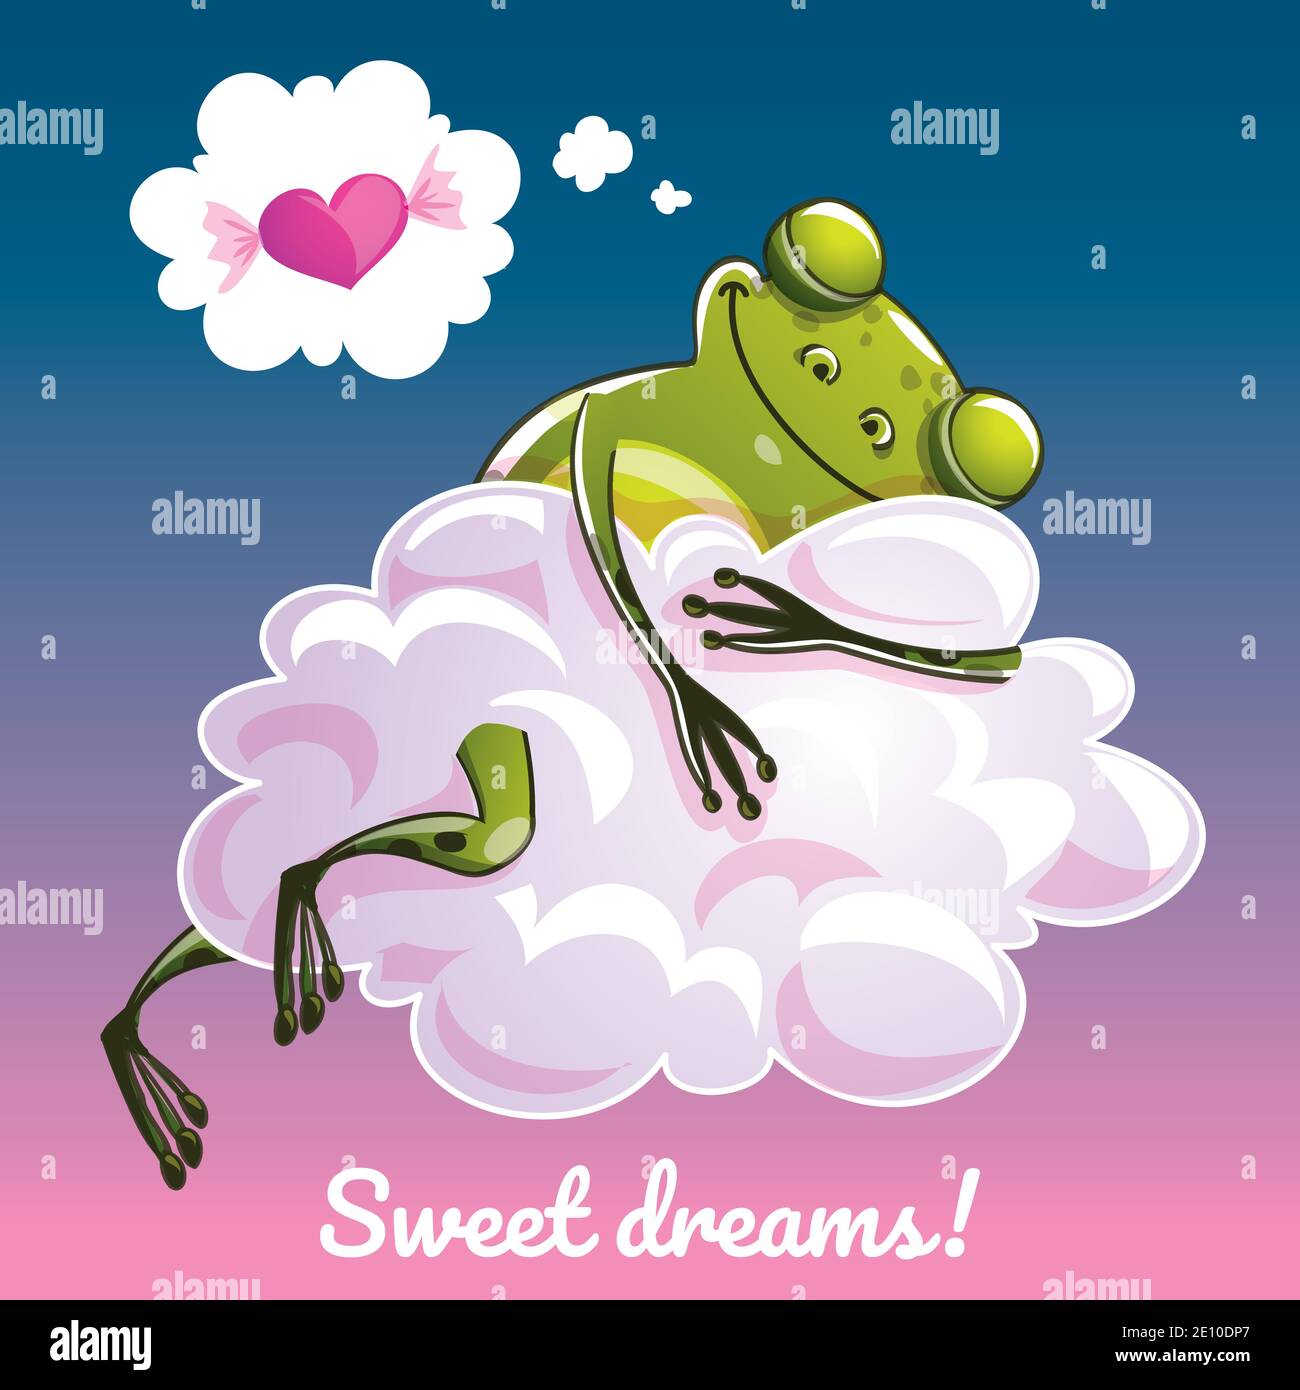 Greeting card with a cartoon frog on the cloud Stock Vector